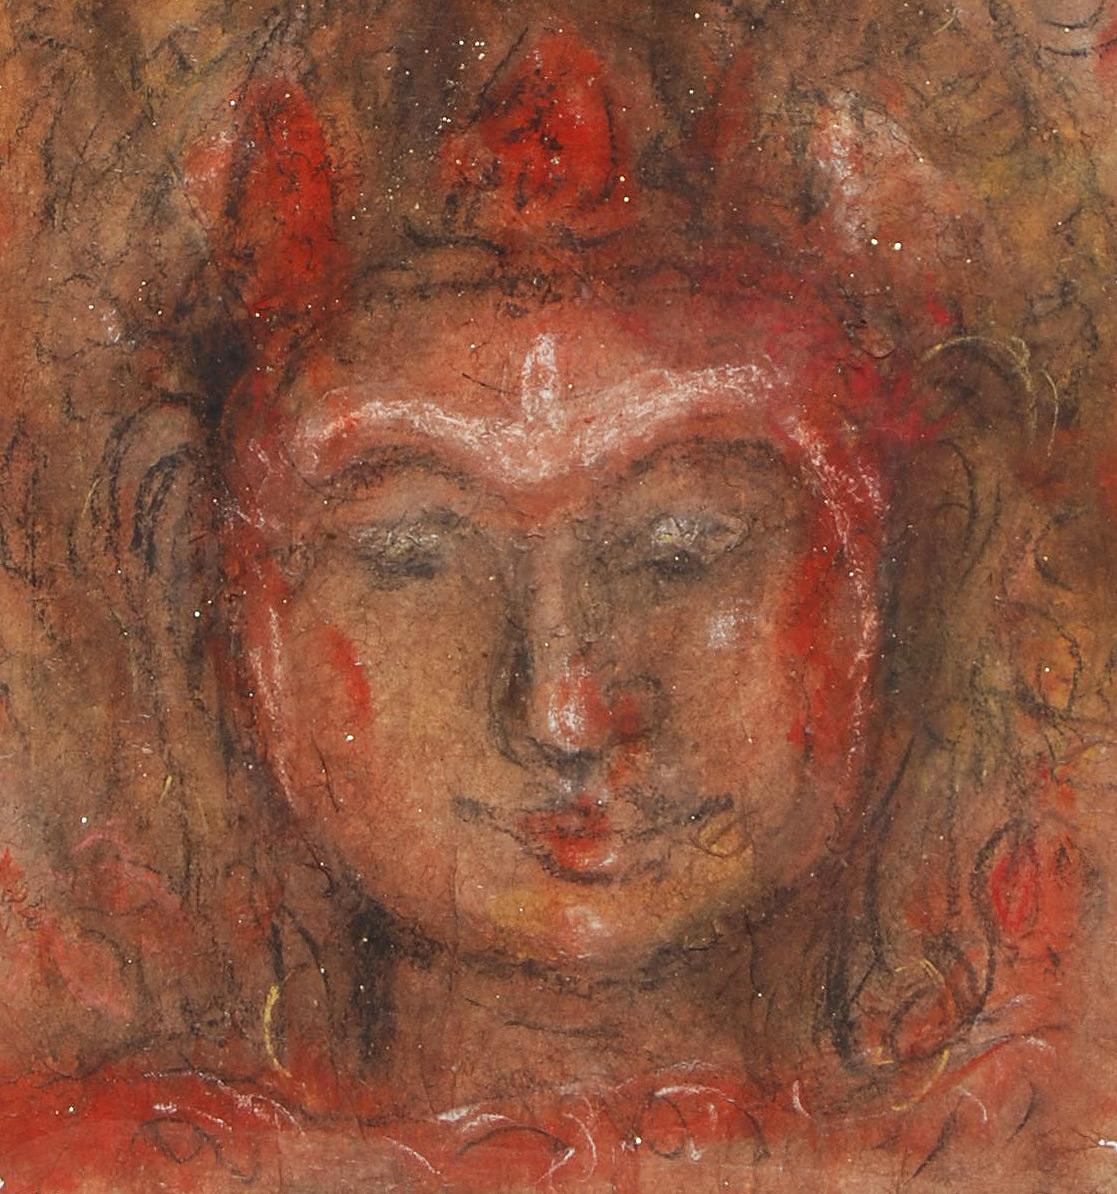 Suhas Roy - Buddha - 30 x 20 inches (unframed size)
Mixed Media on Thick Imported Paper. 
Inclusive of shipment in framed ready to hang form . 

Style : He is one of the biggest and the most enduring names in the genre of Indian modern art. Often